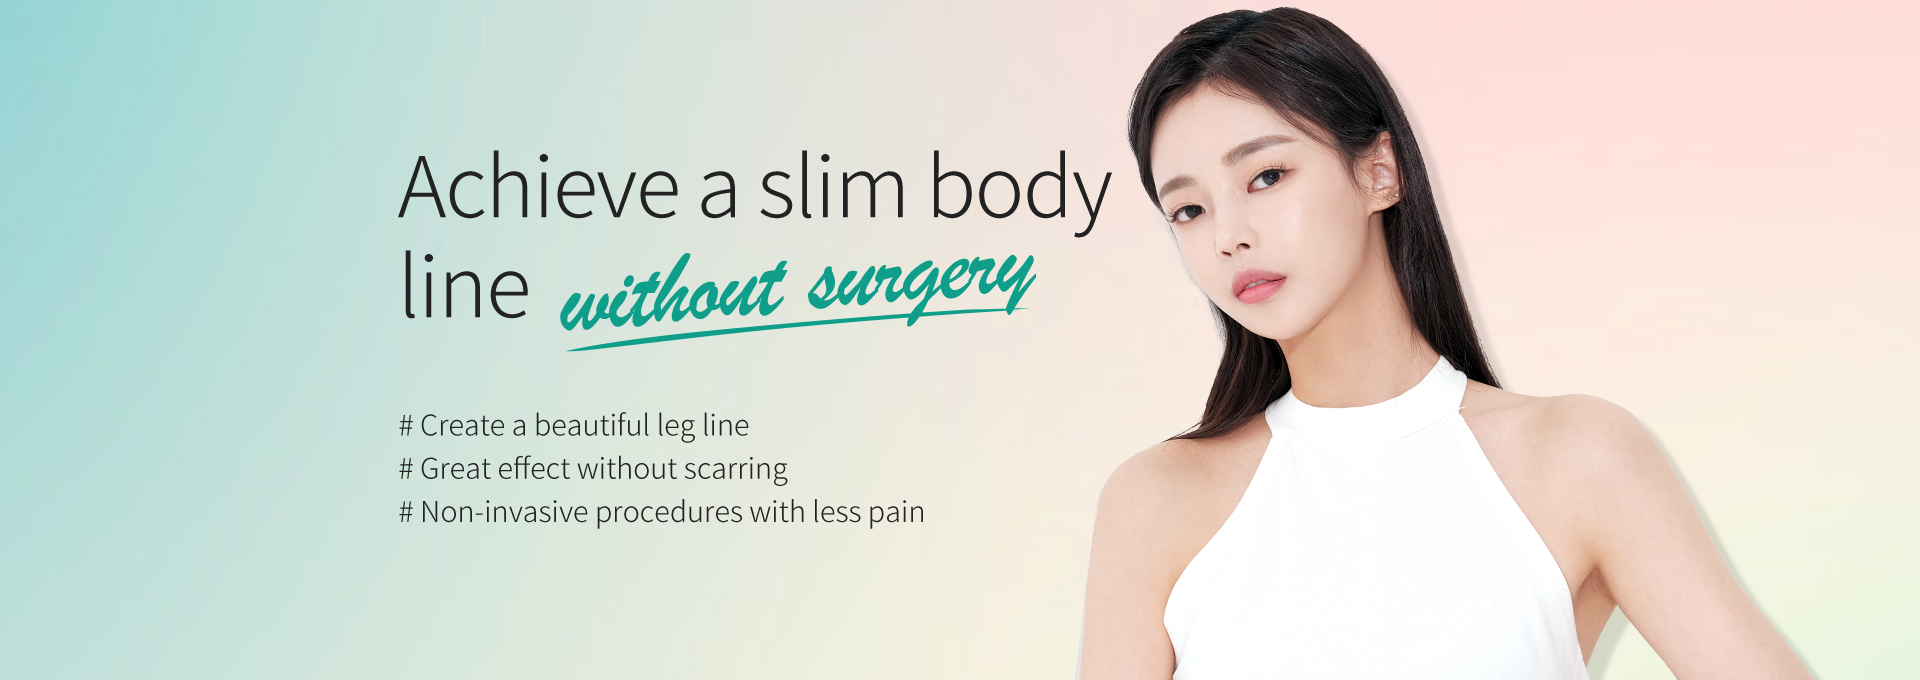 Achieve a slim body line without surgery